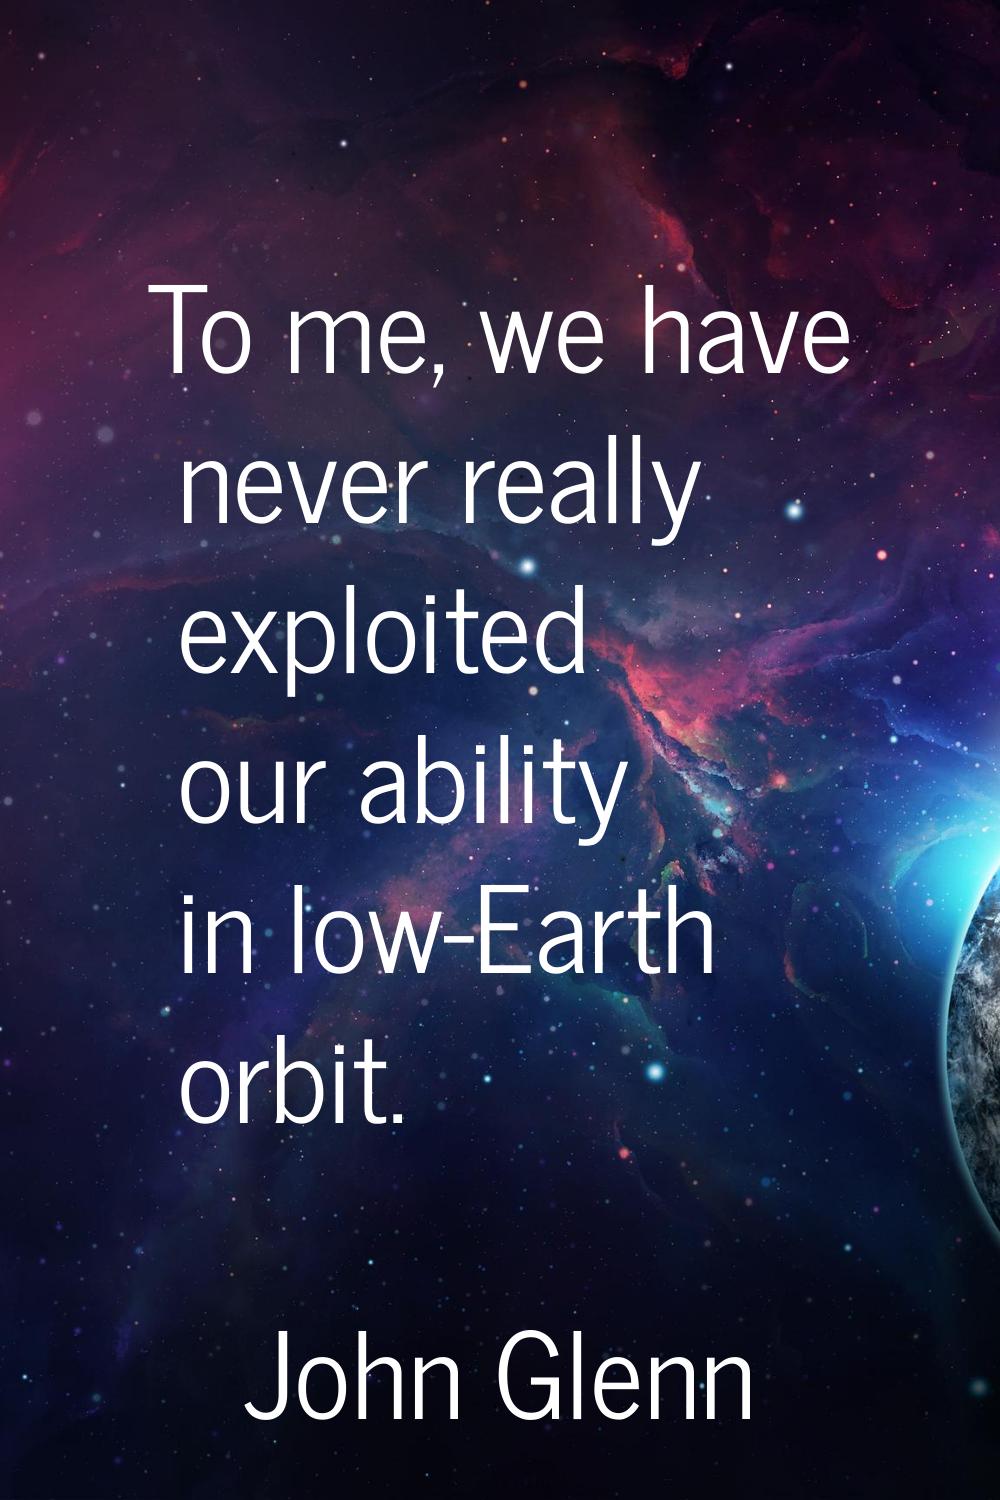 To me, we have never really exploited our ability in low-Earth orbit.